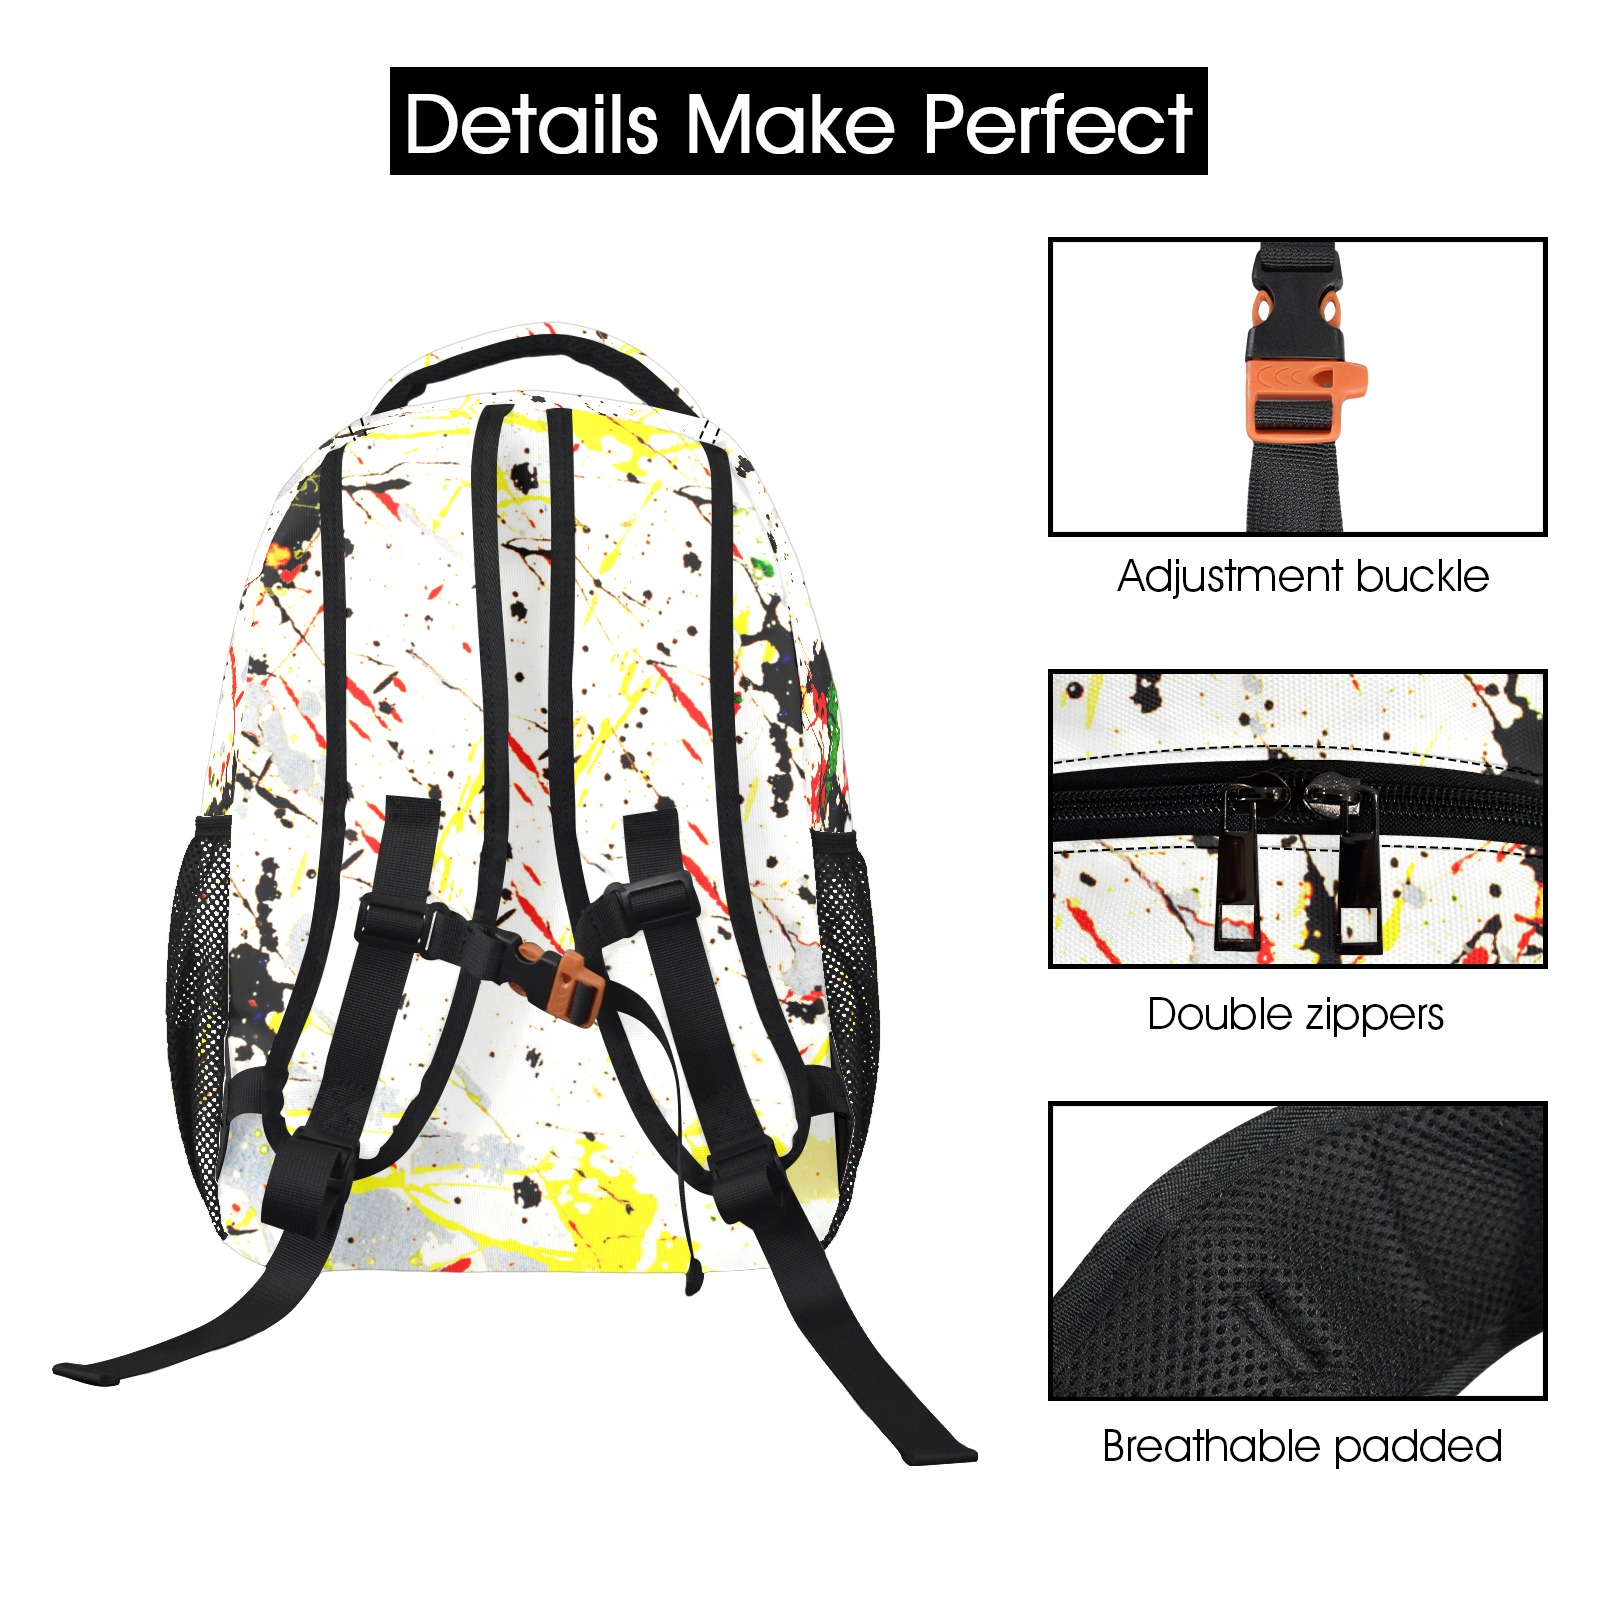 Yellow & Black Paint Splatter 17-inch All Over Print Casual Backpack